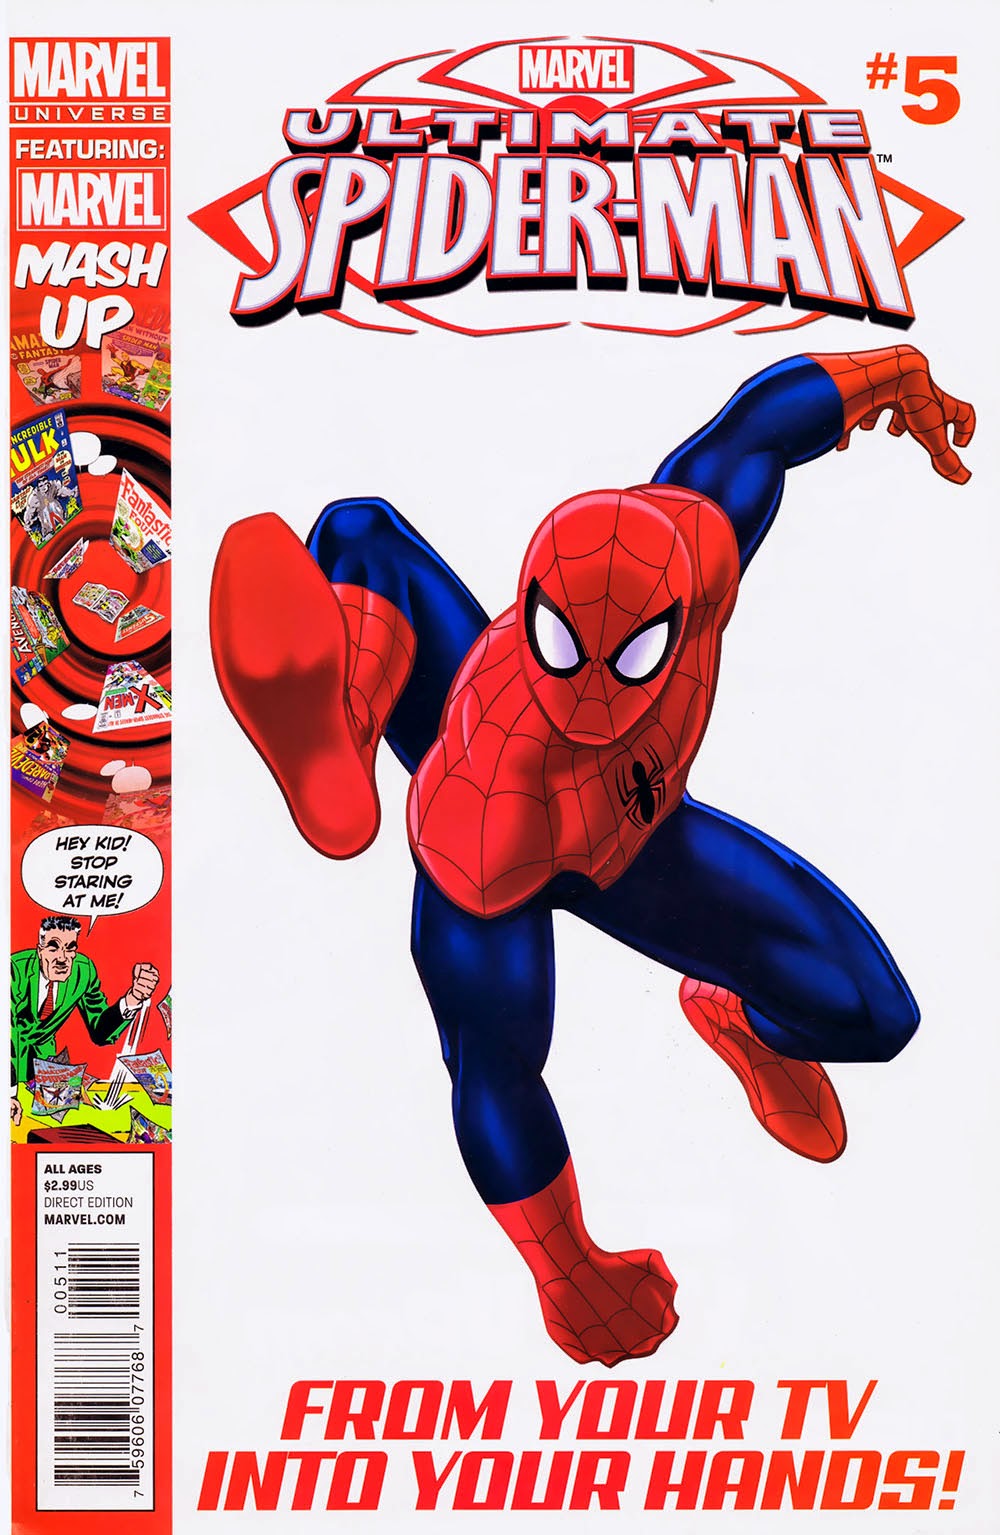 Marvel Universe: Ultimate Spider-Man Issue 5 | Ultimate 